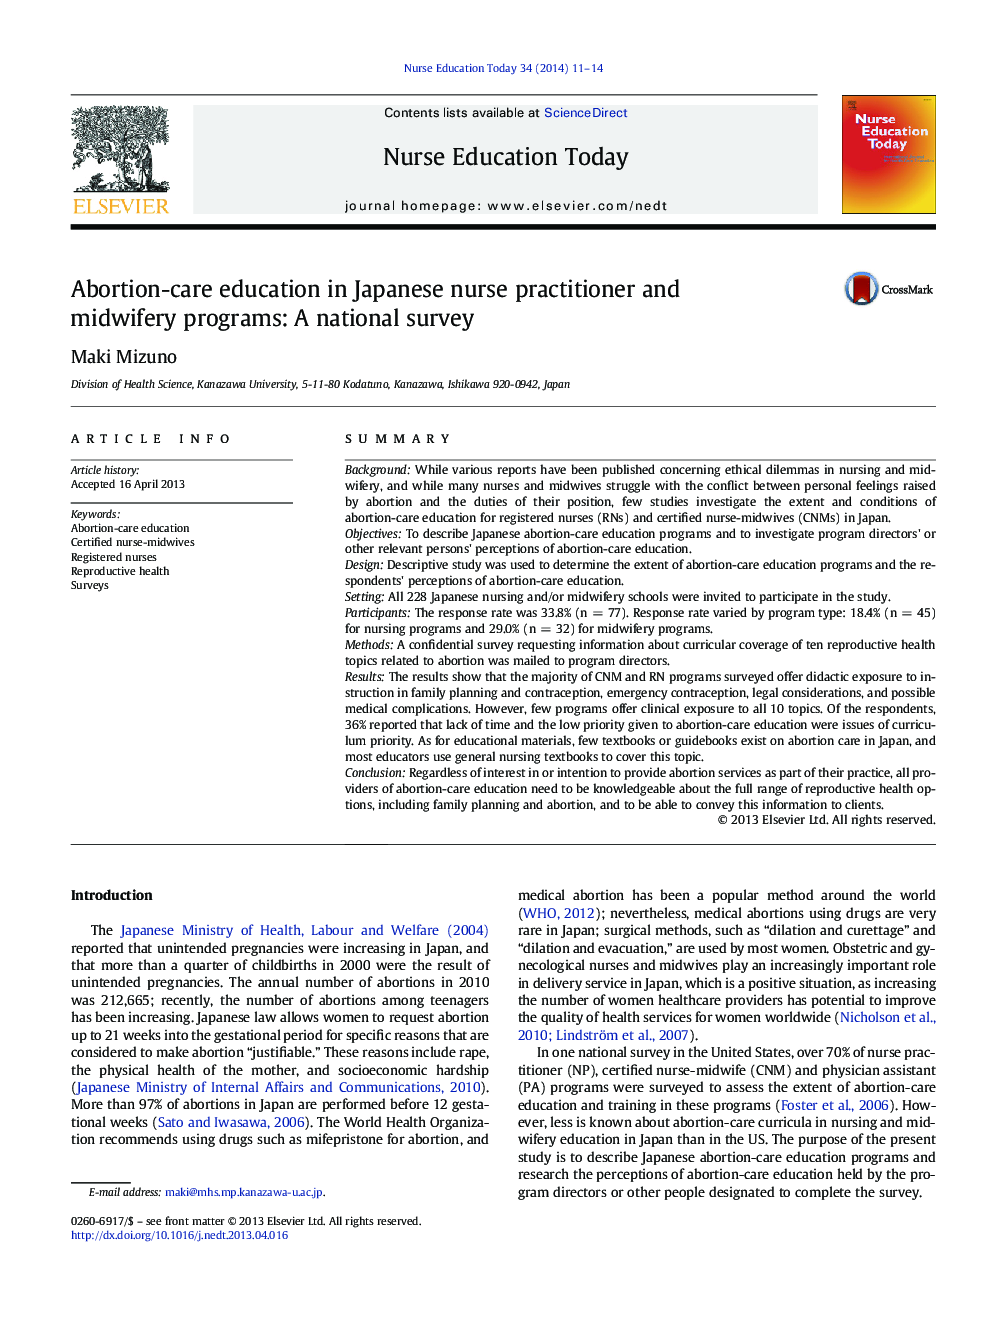 Abortion-care education in Japanese nurse practitioner and midwifery programs: A national survey